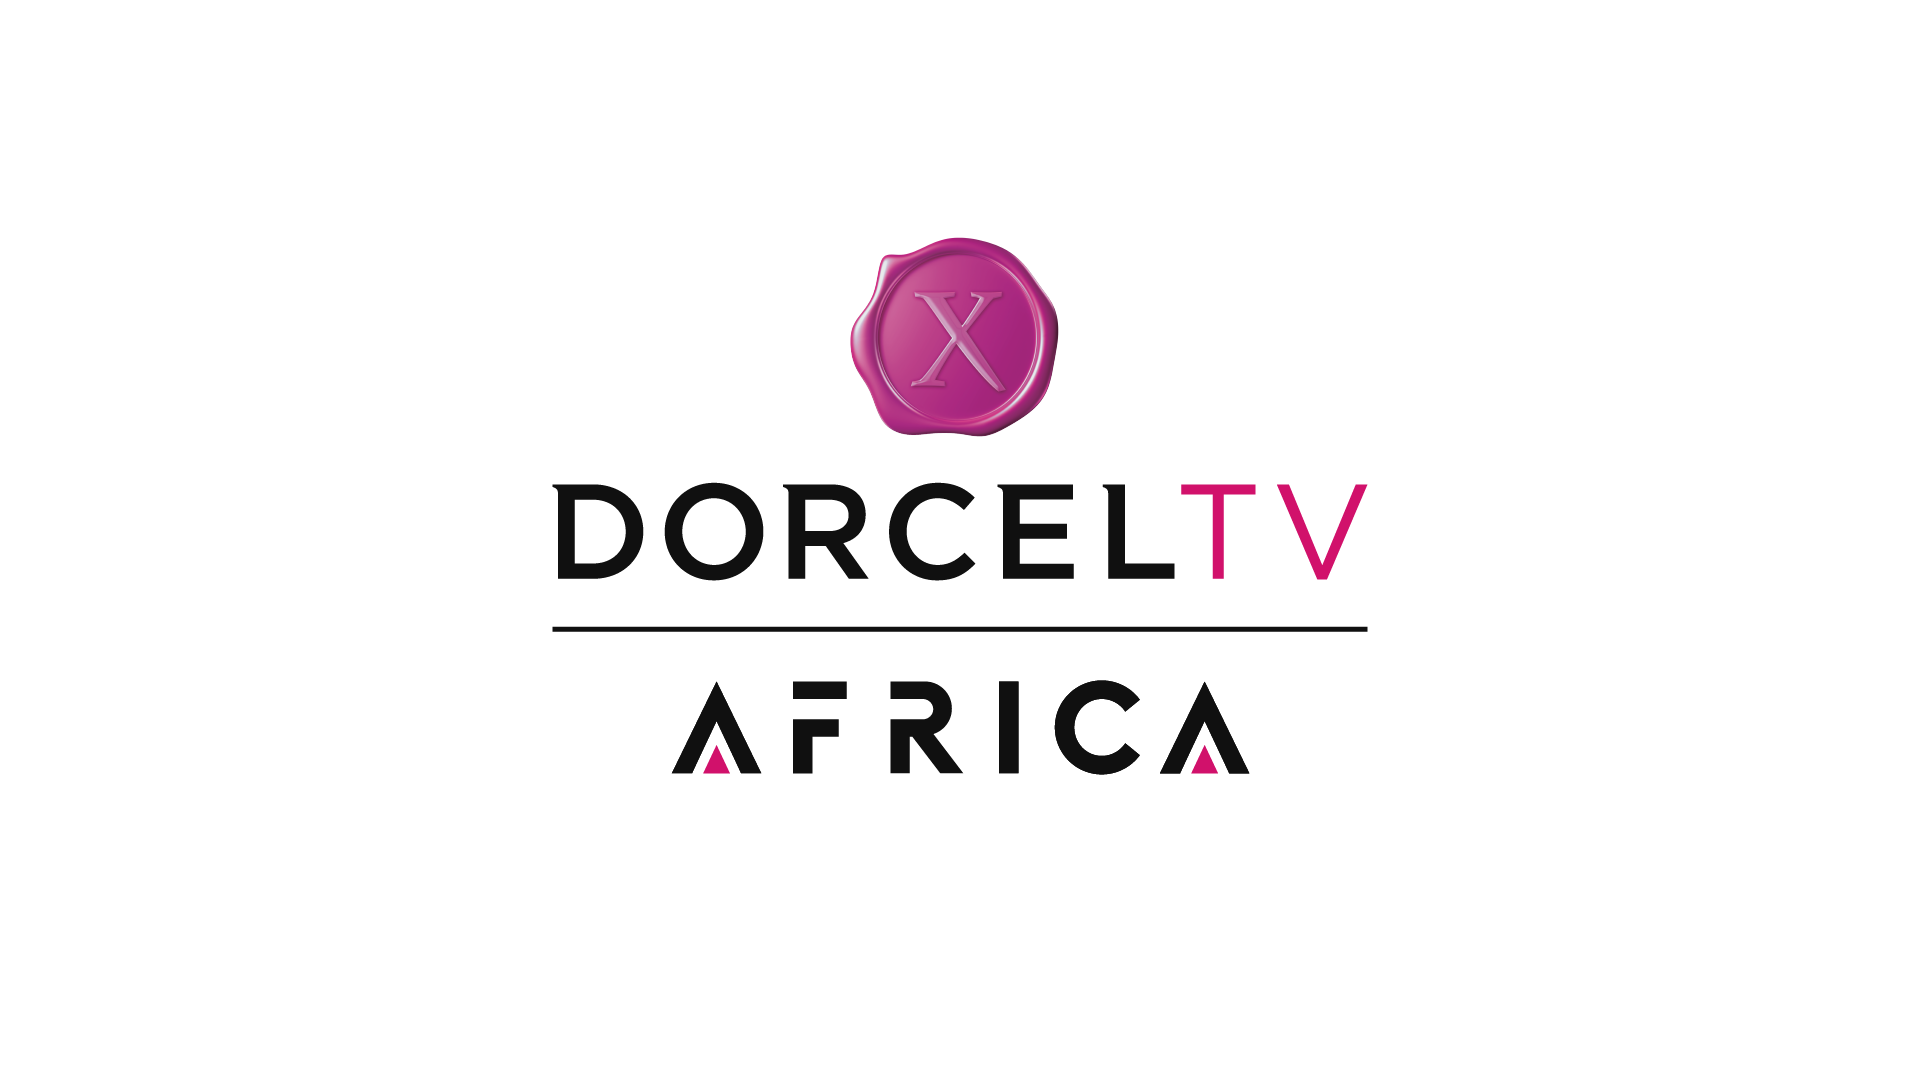 MARC DORCEL is pleased to announce the official launch of their new TV Chan...